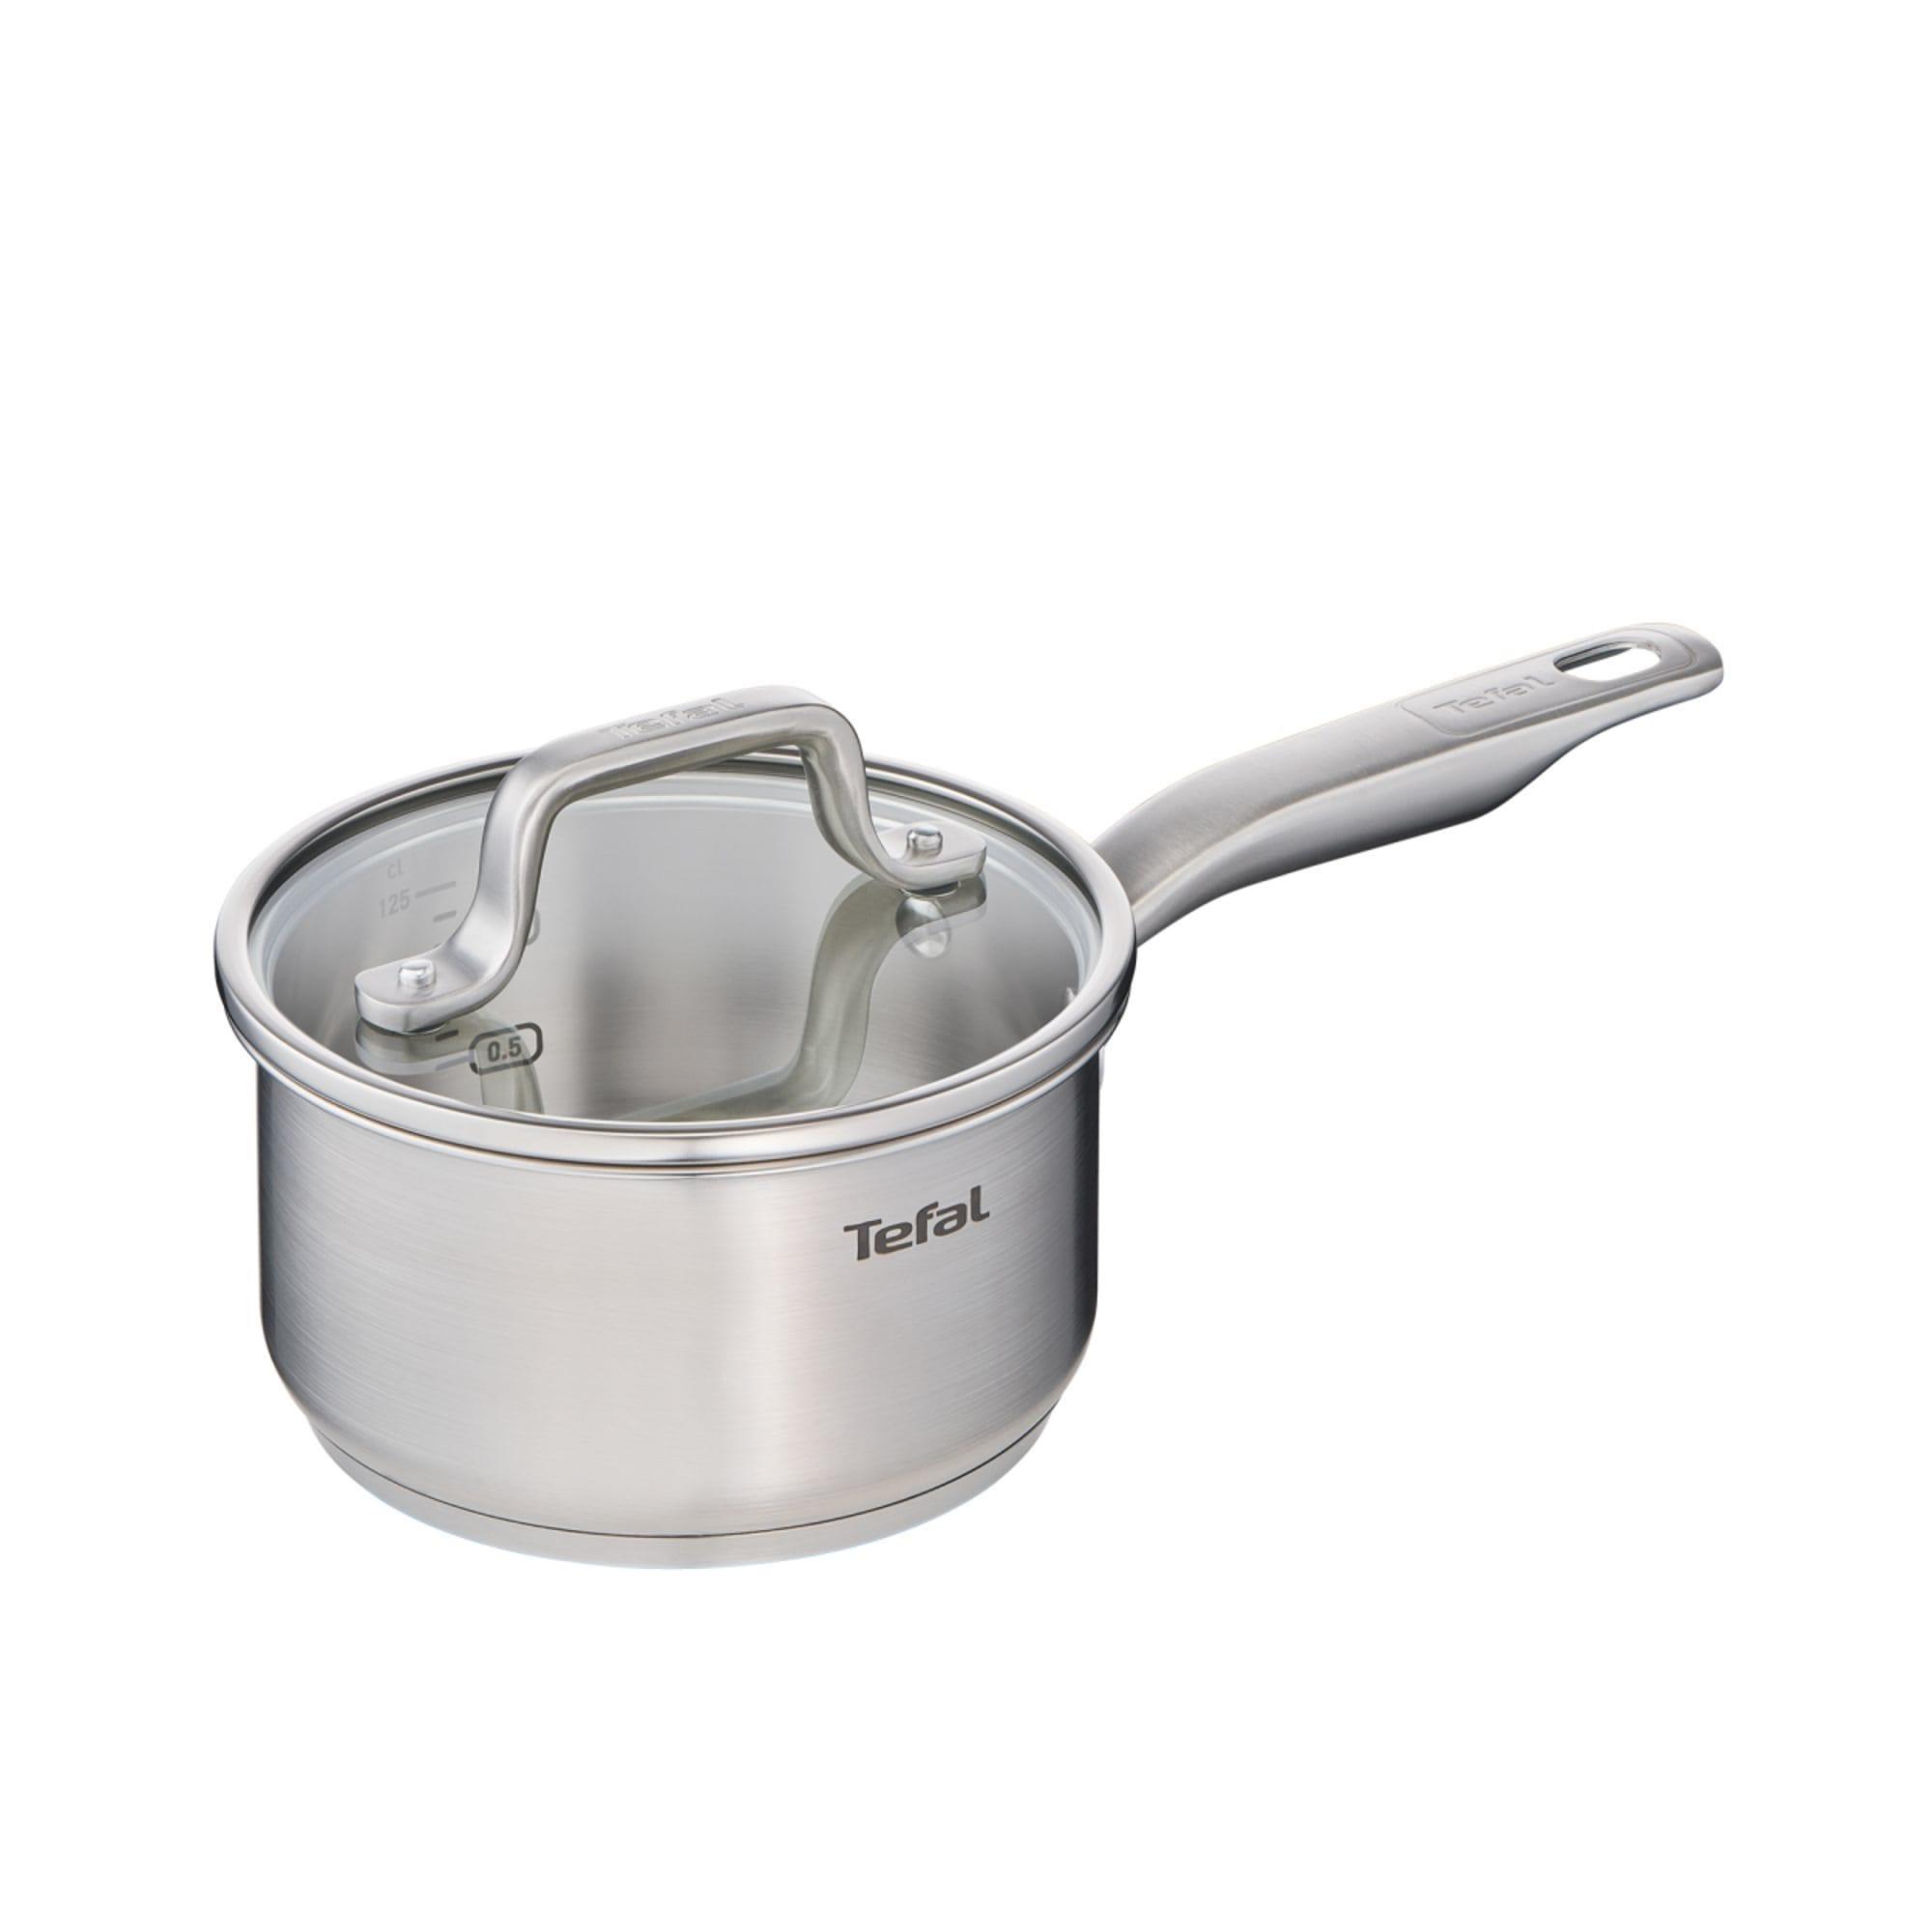 Tefal Virtuoso 3pc Stainless Steel Cookware Set Image 4